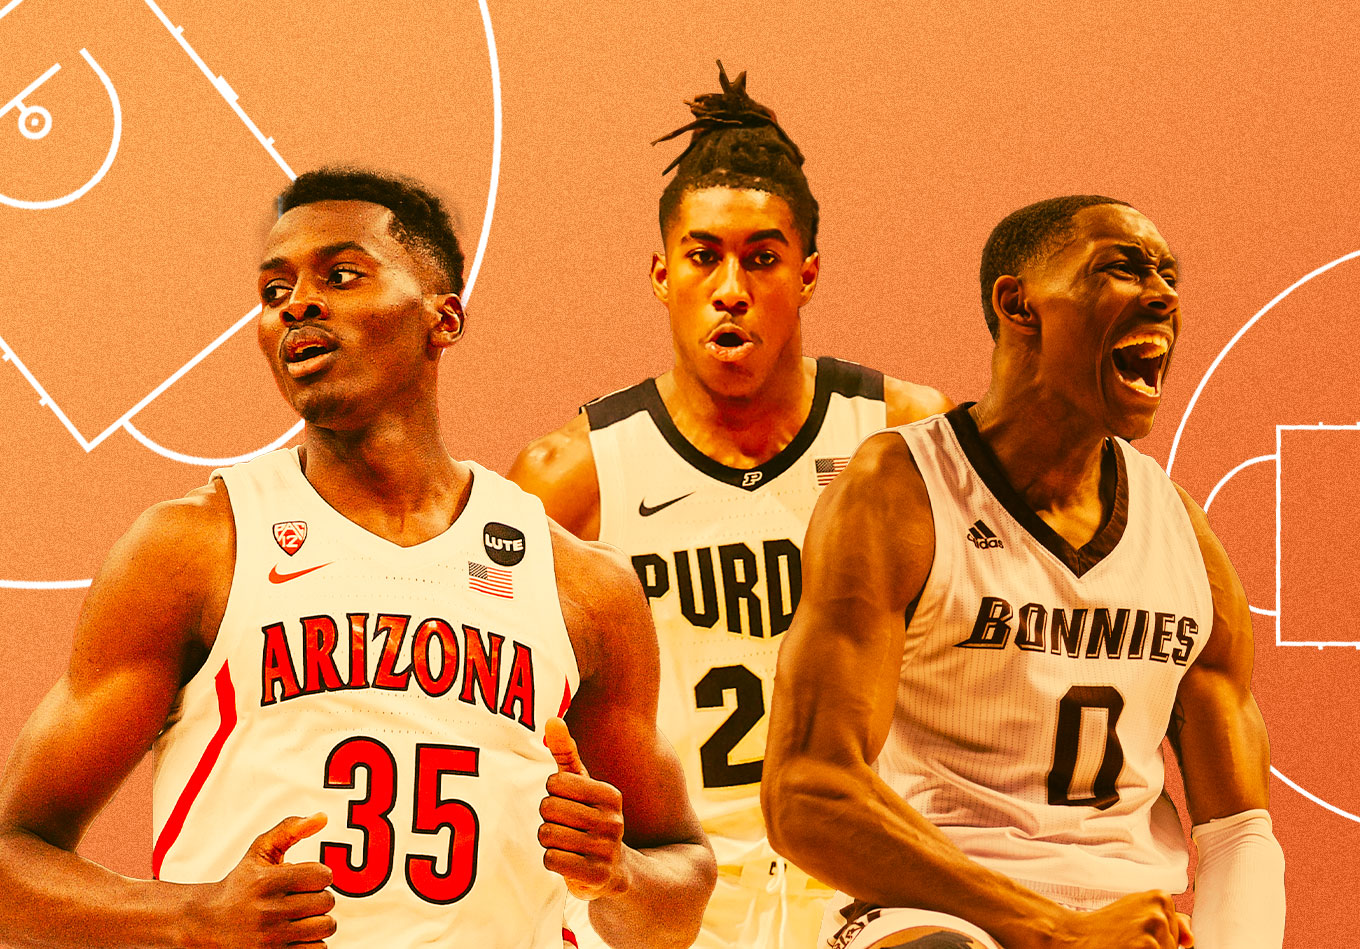 Purdue, St. Bonaventure, and the PAC-12 Rise up in This Week’s TRACR Rankings